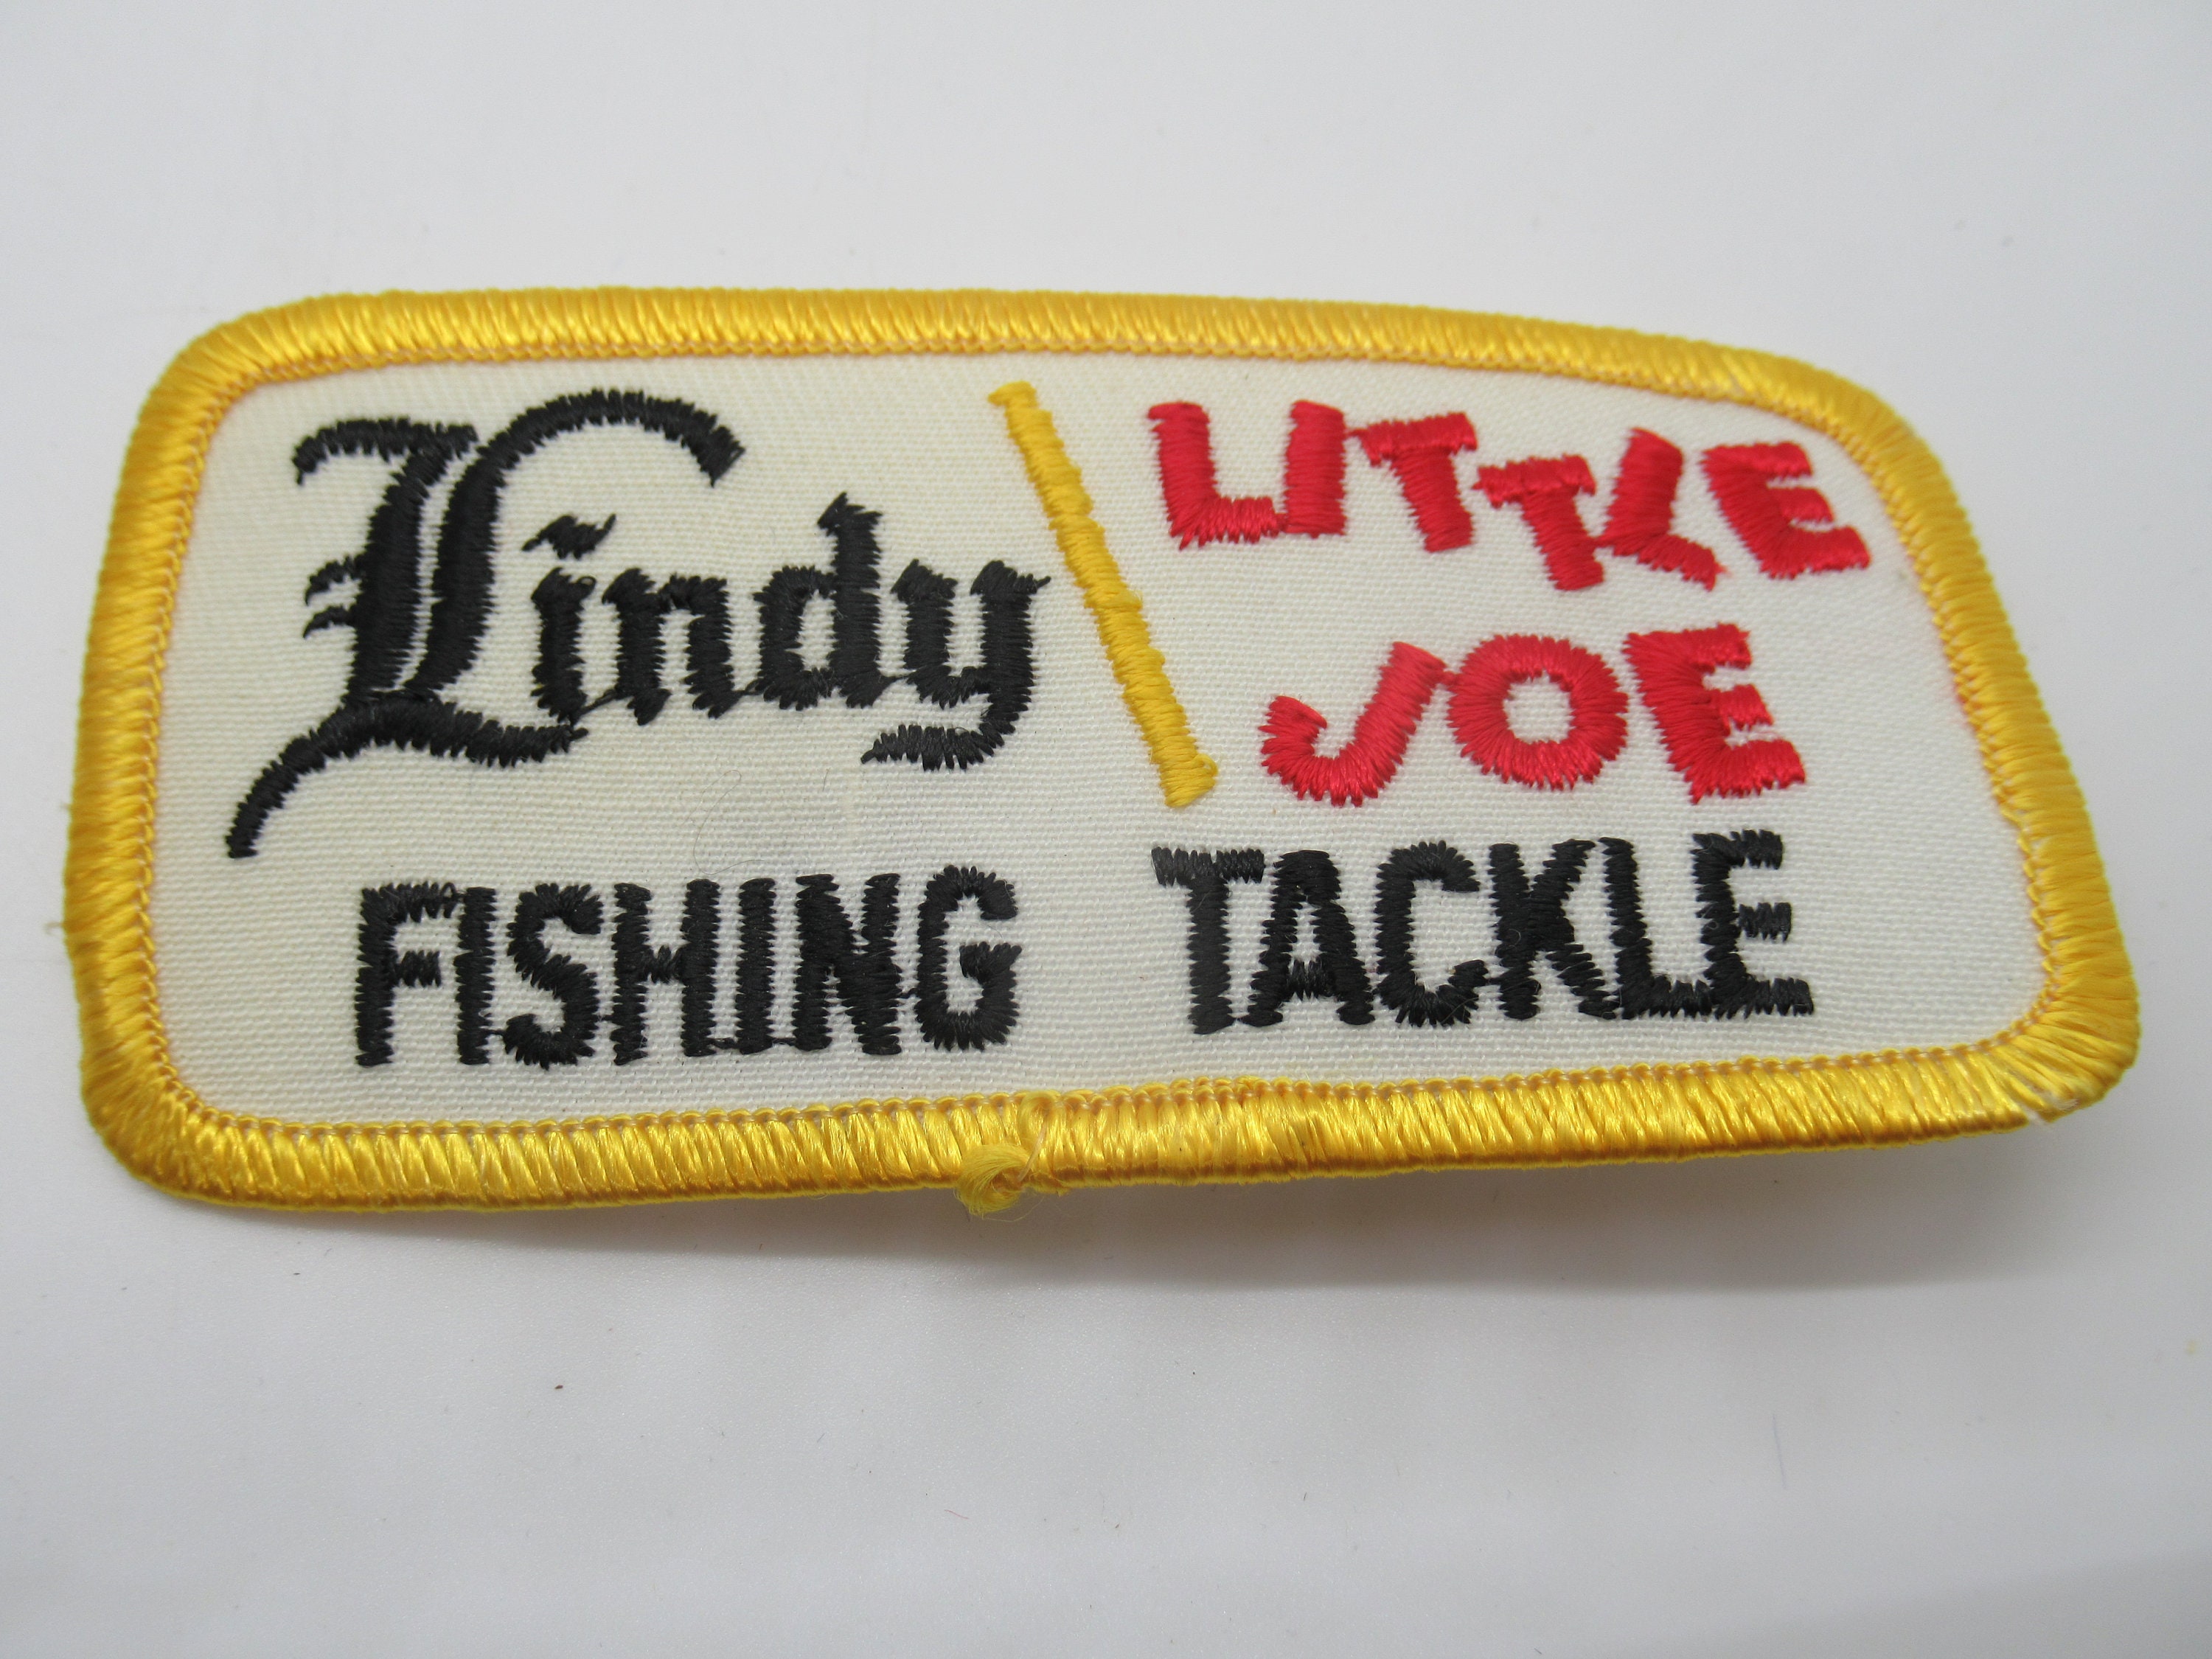 Lindy Little Joe Fishing Tackle Vintage Rectangle Iron-on Patch 